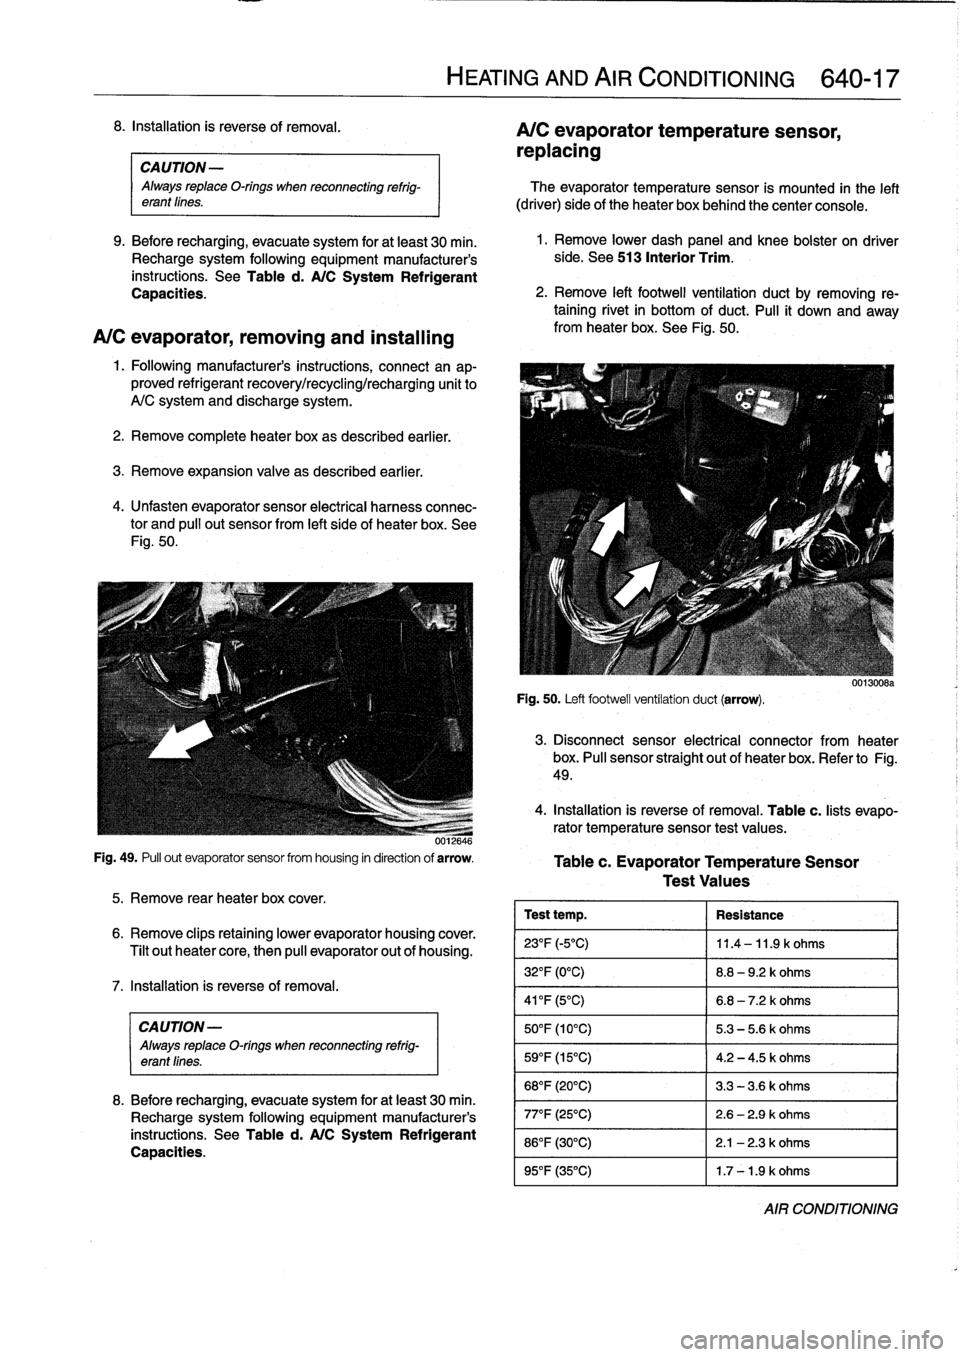 BMW 328i 1998 E36 Owners Manual 
CAUTION
-

Always
replace
O-rings
when
reconnecting
refrig-
erant
fines
.

9
.
Before
recharging,
evacuate
system
for
at
least
30
min
.
Recharge
system
following
equipment
manufacturers
instructions